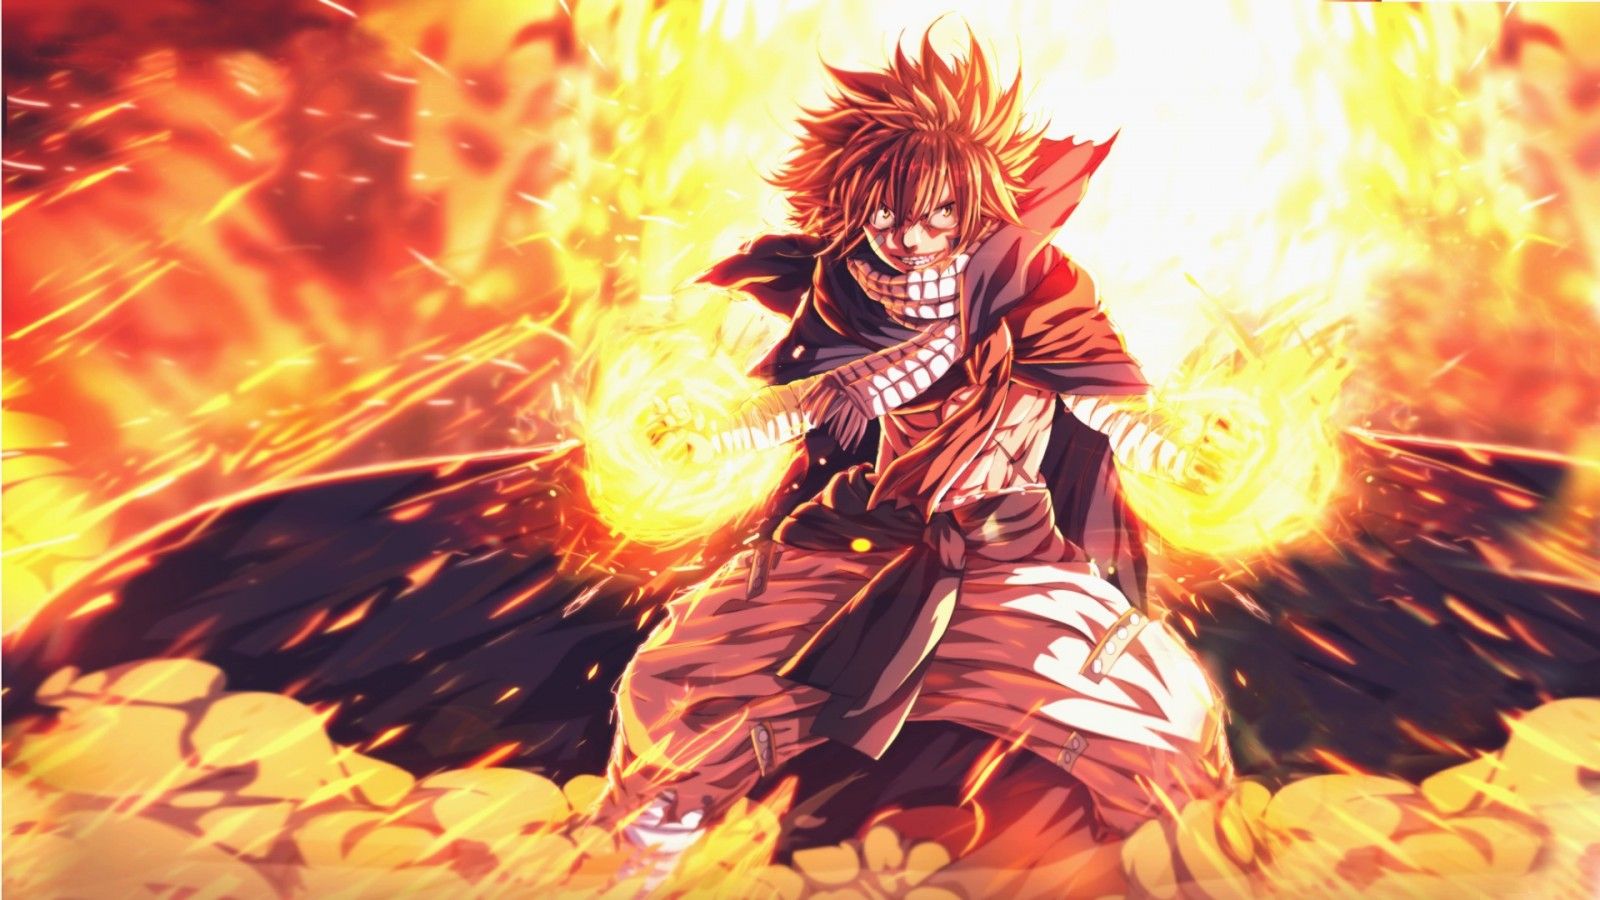 Epic Fairy Tail Wallpapers